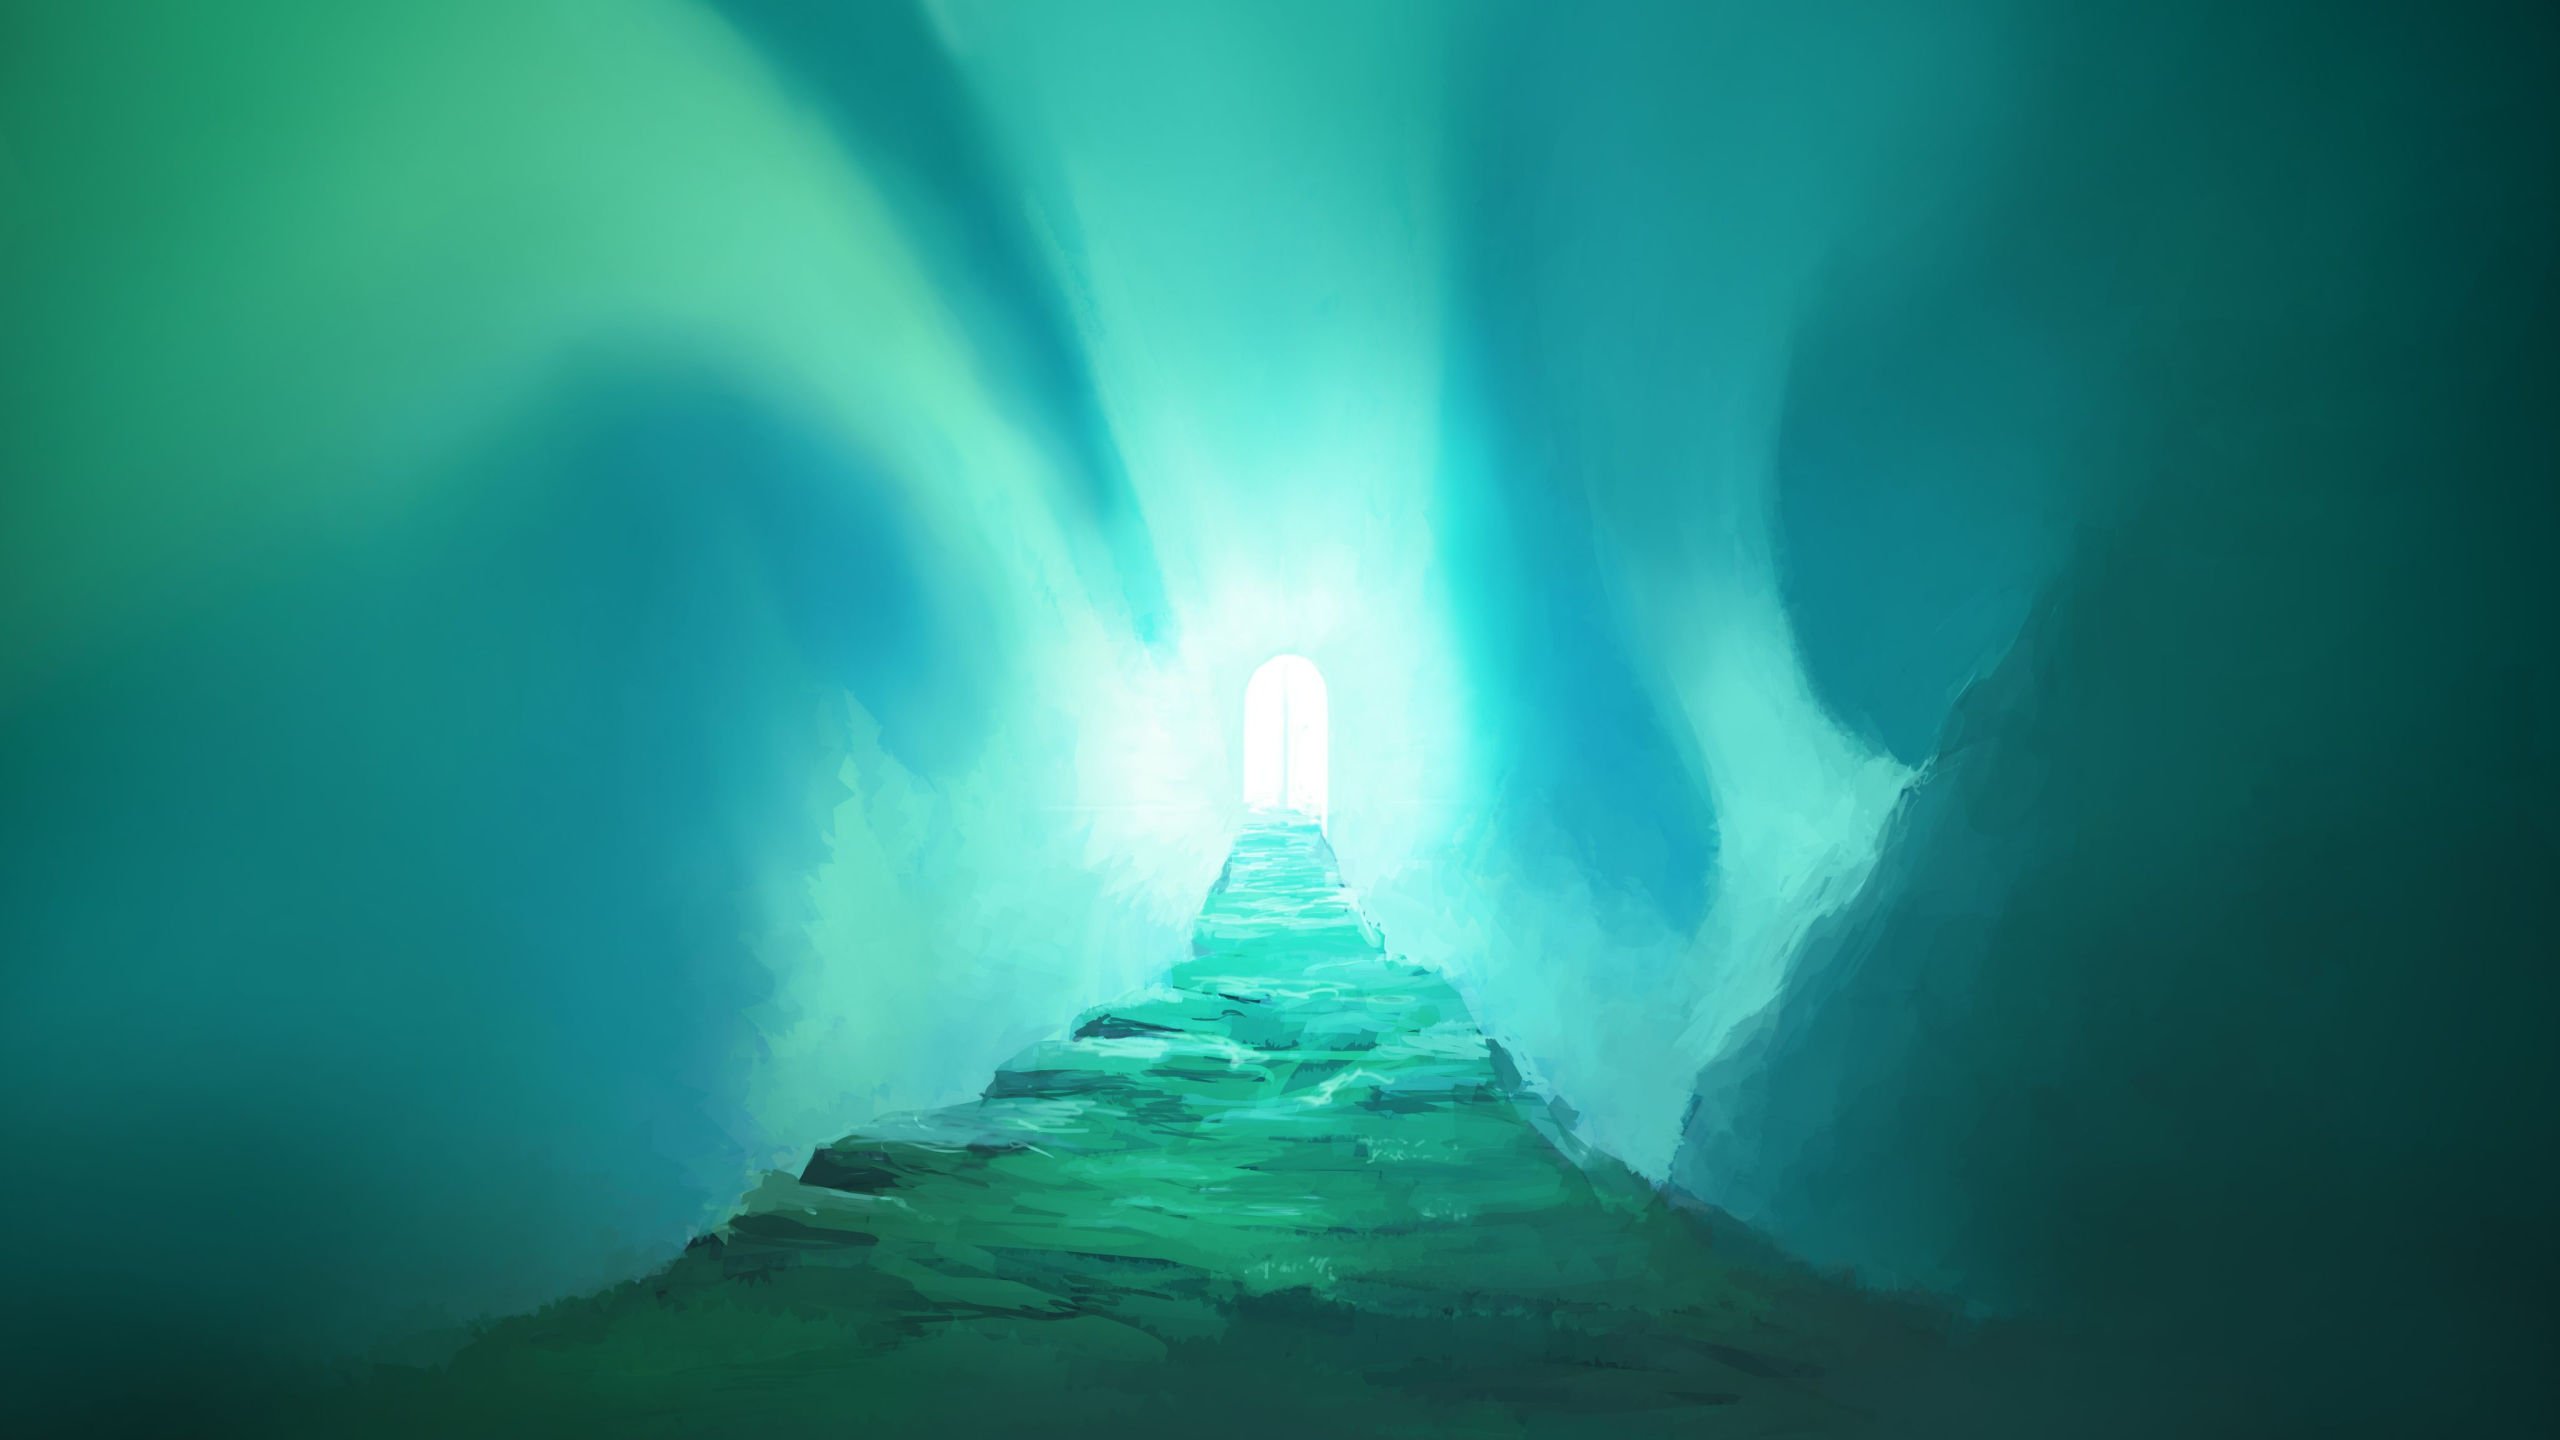 Valhalla concept image with northern lights